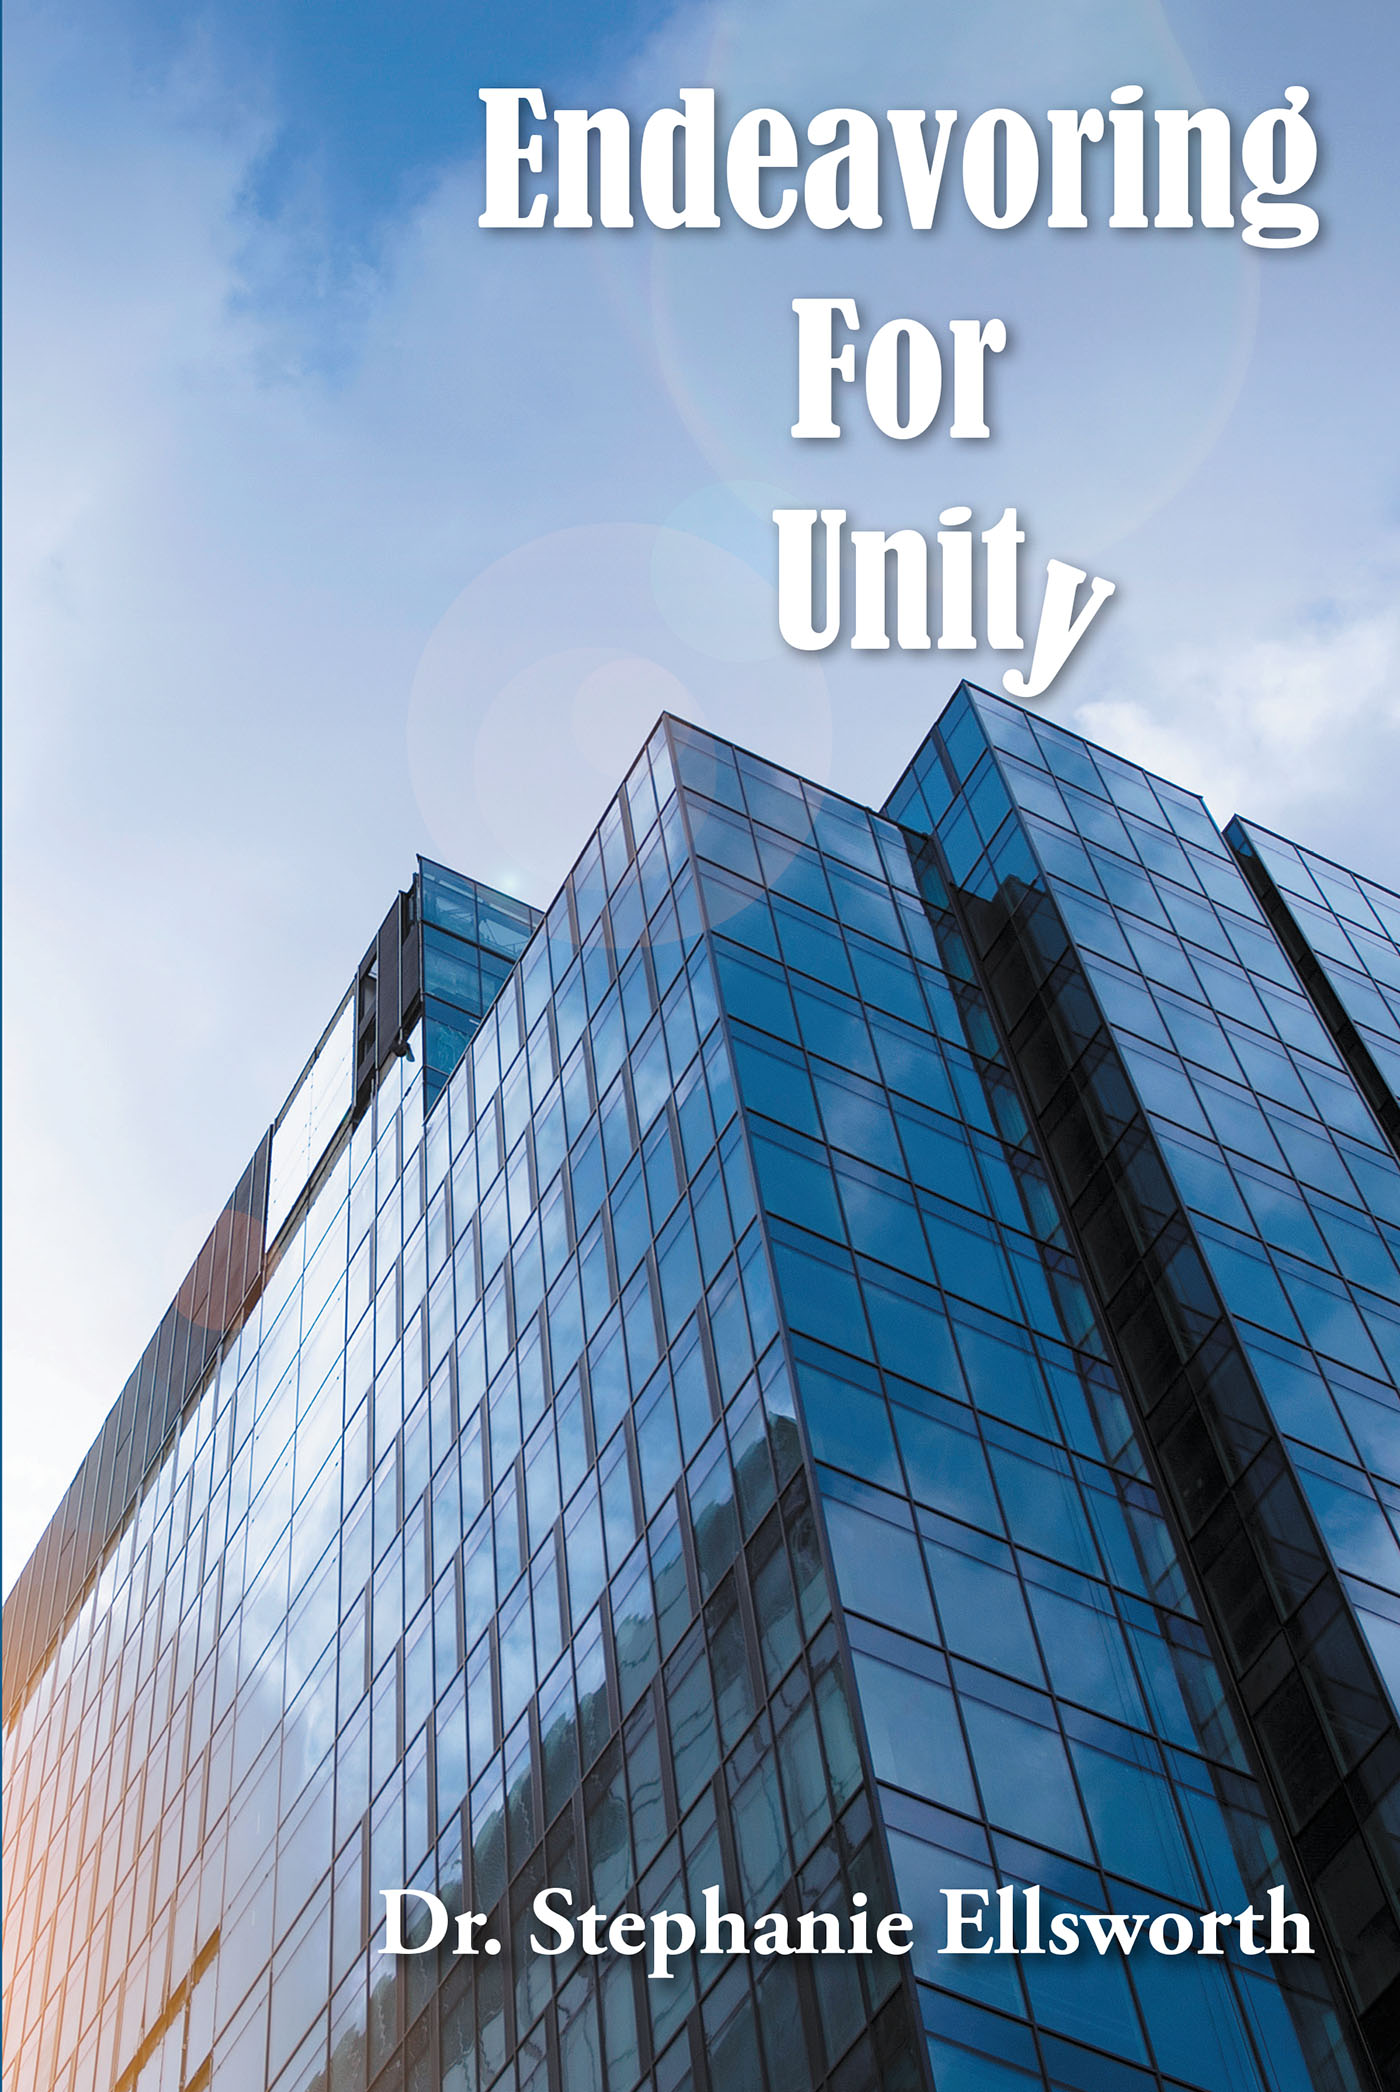 Dr. Stephanie Ellsworth’s Newly Released "Endeavoring For Unity" is an Empowering Message of the Power of Working as One